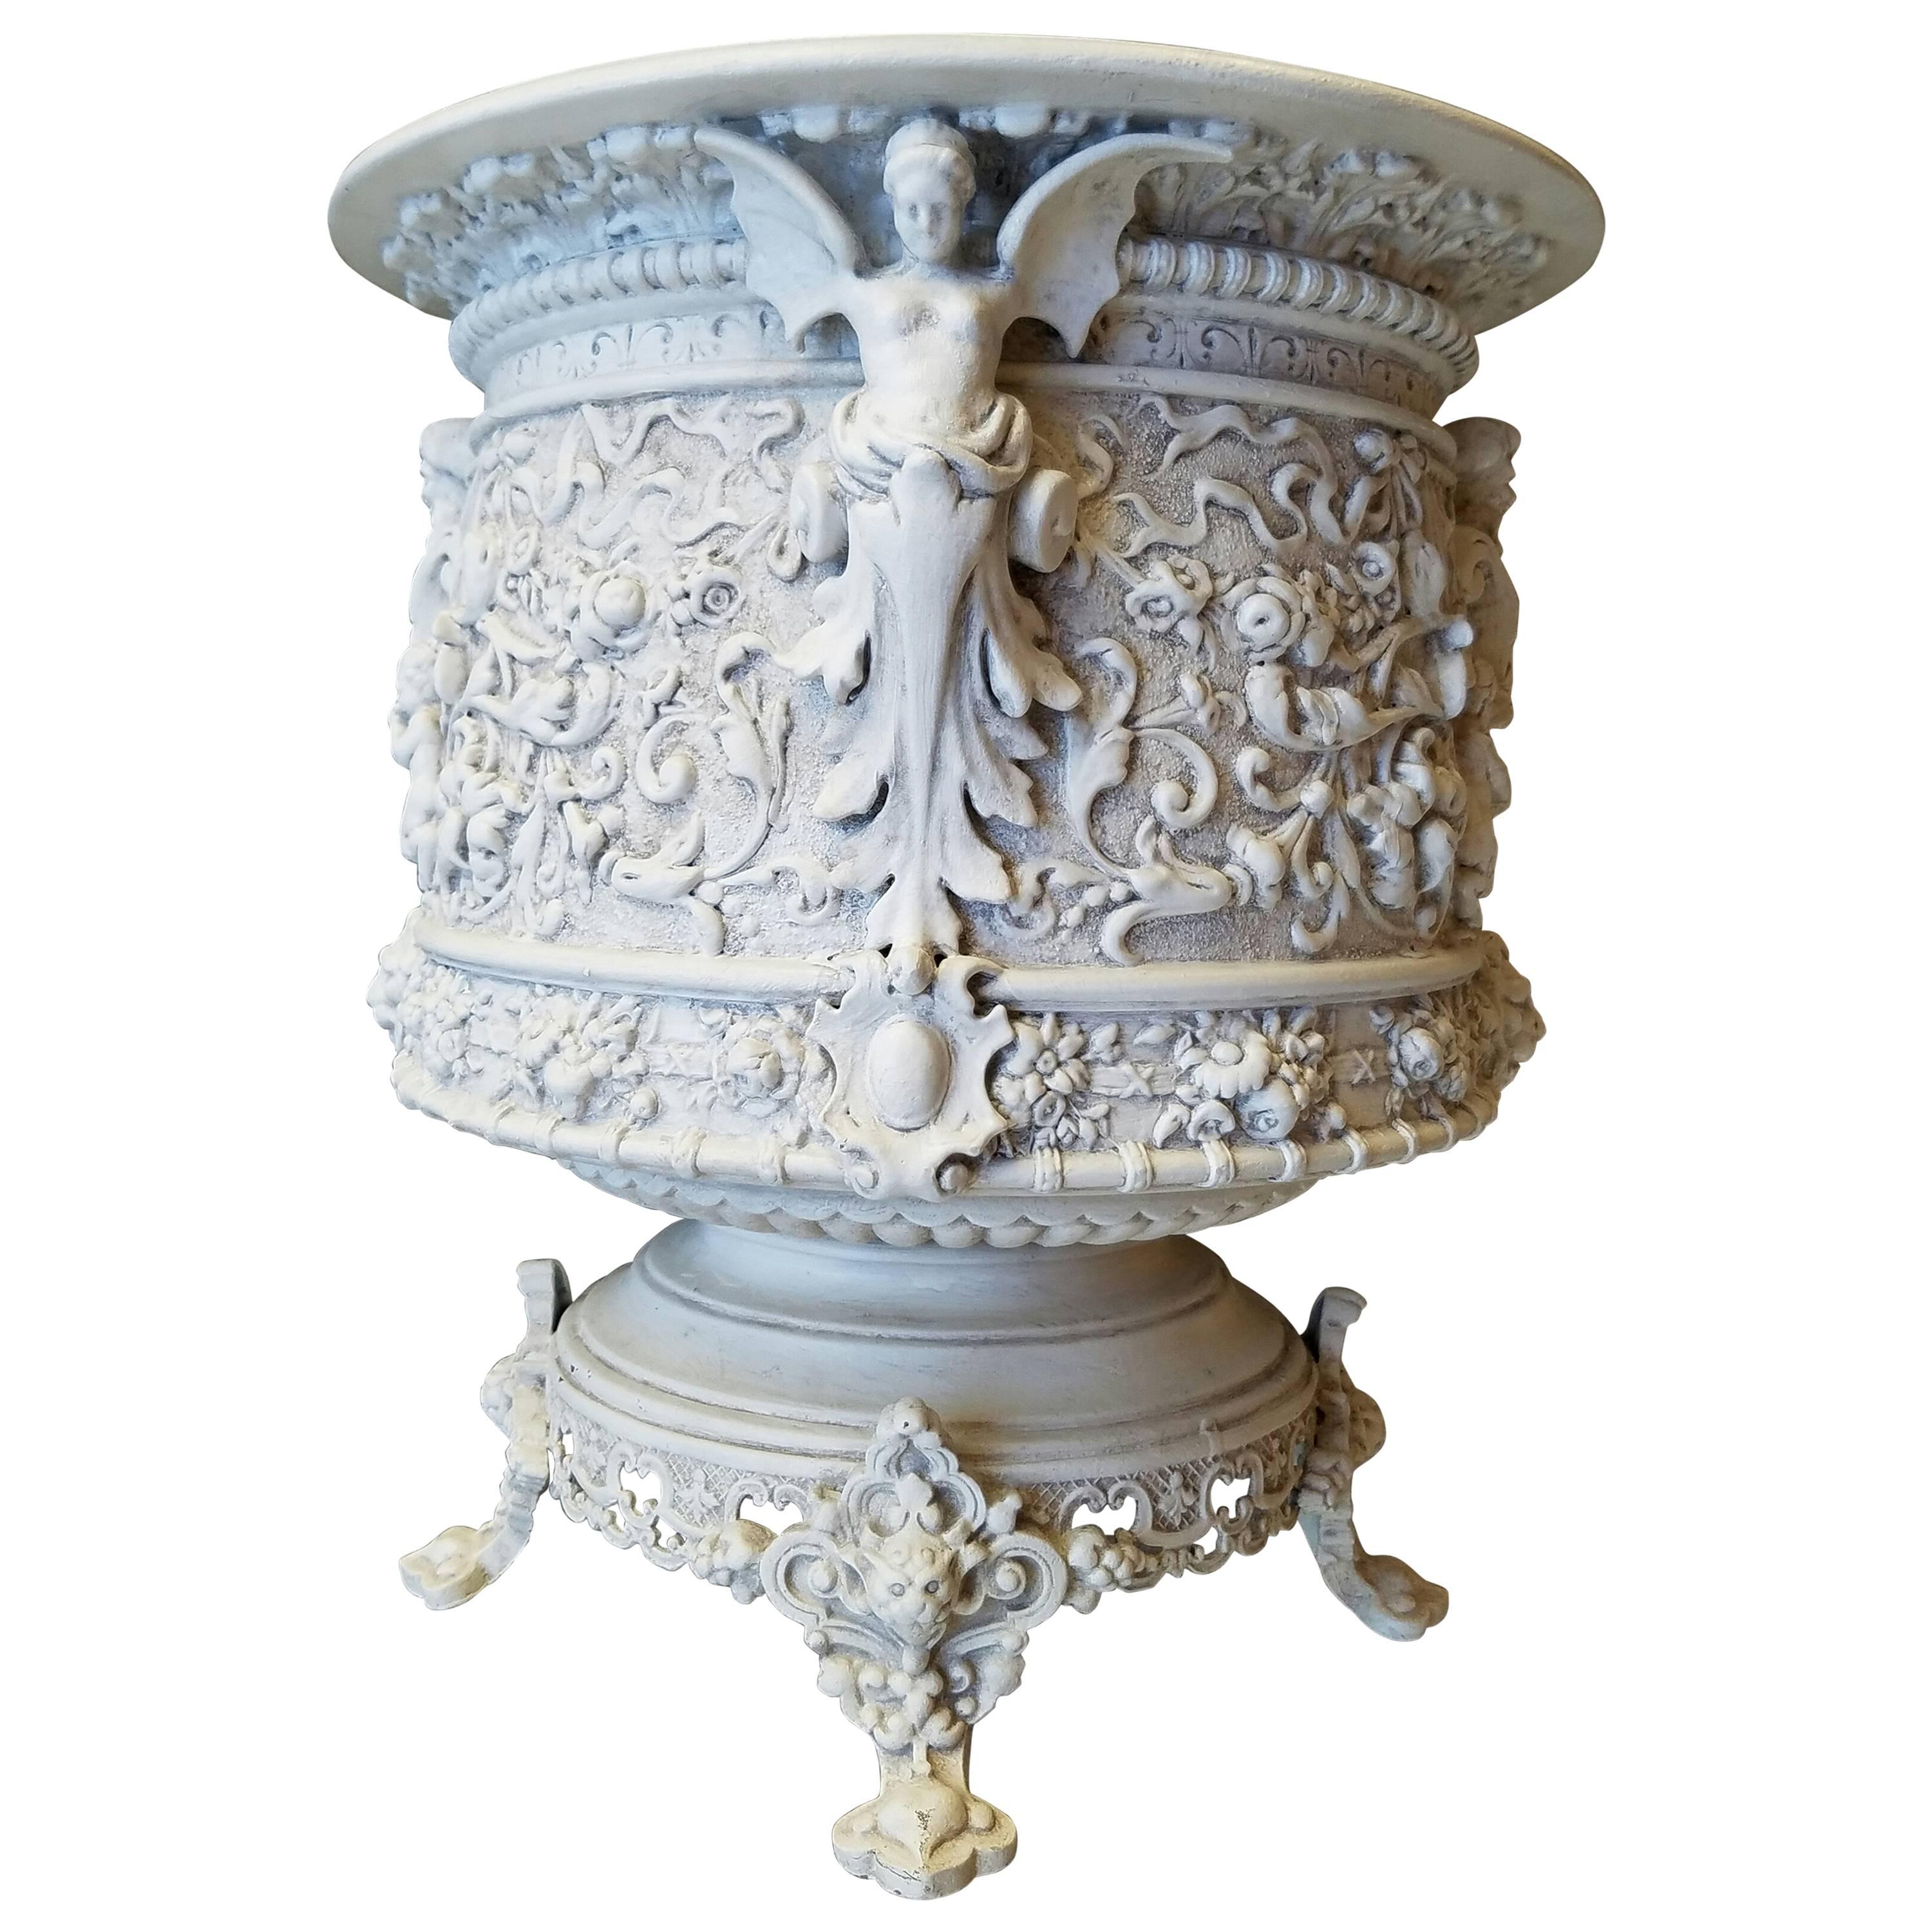  Italian Terracotta Planter with Angels and Fawn, Cherubs and Swags